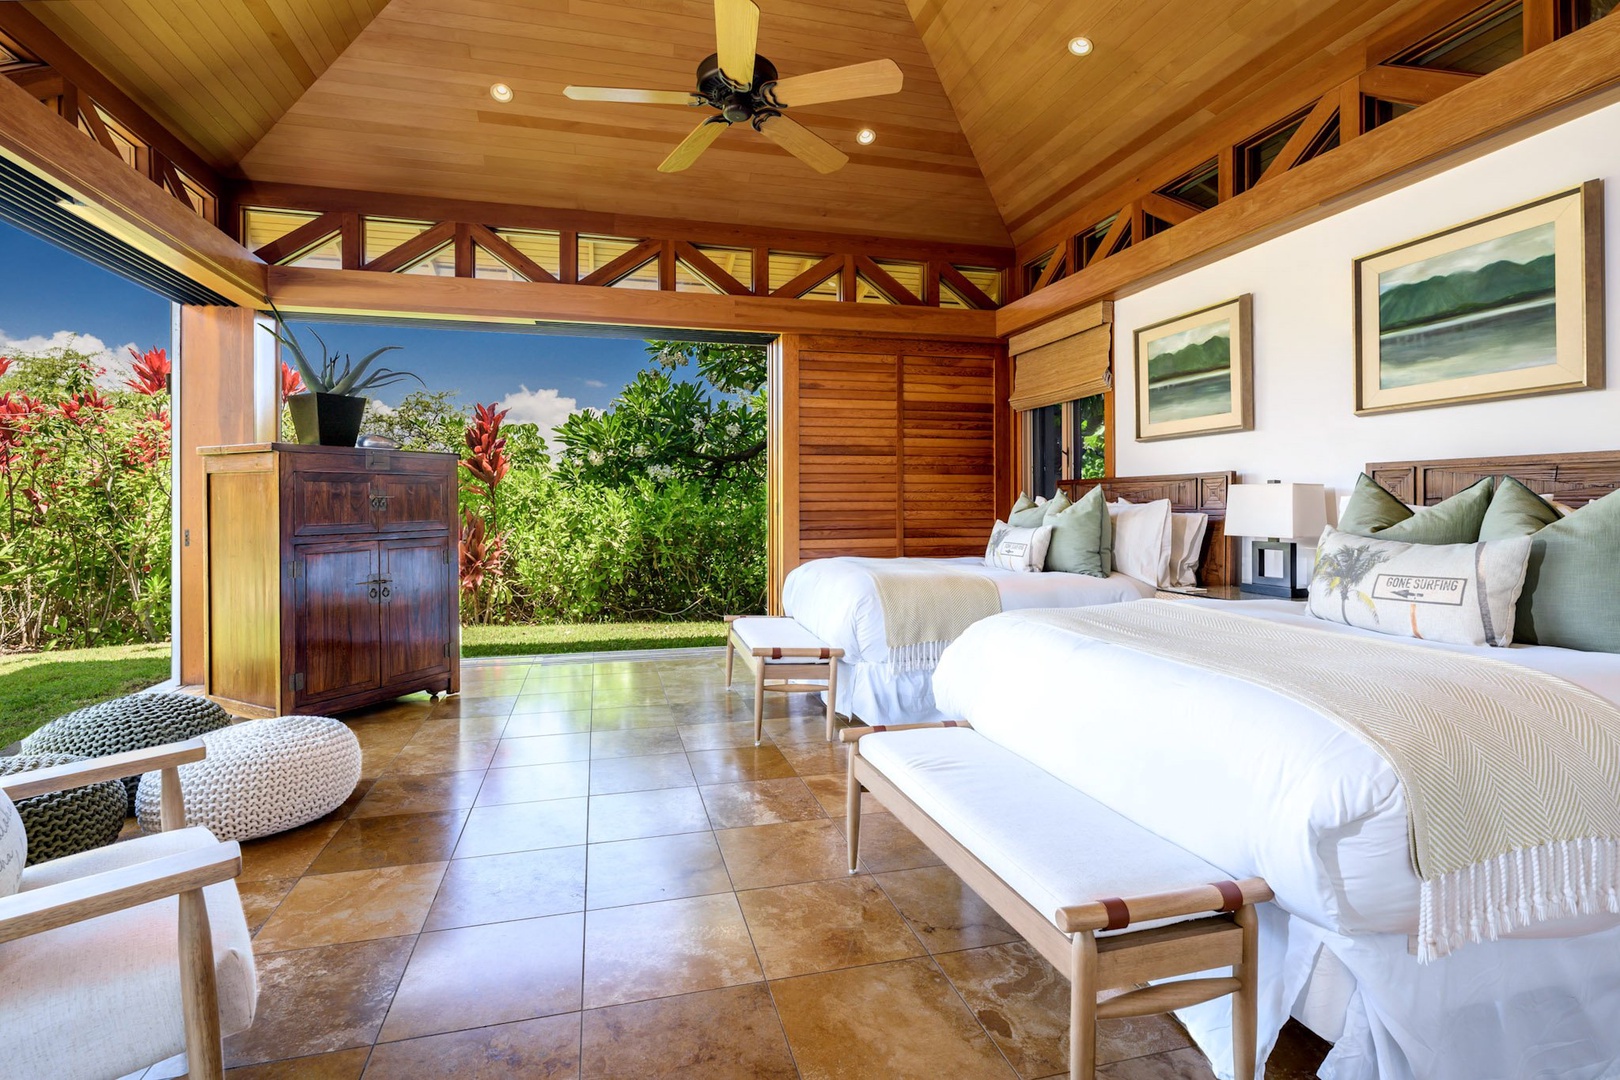 Kamuela Vacation Rentals, 3BD Na Hale 3 at Pauoa Beach Club at Mauna Lani Resort - The second guest suite, with 2 full beds, allows complete outdoor immersion with doors that open fully to the yard and lanai.